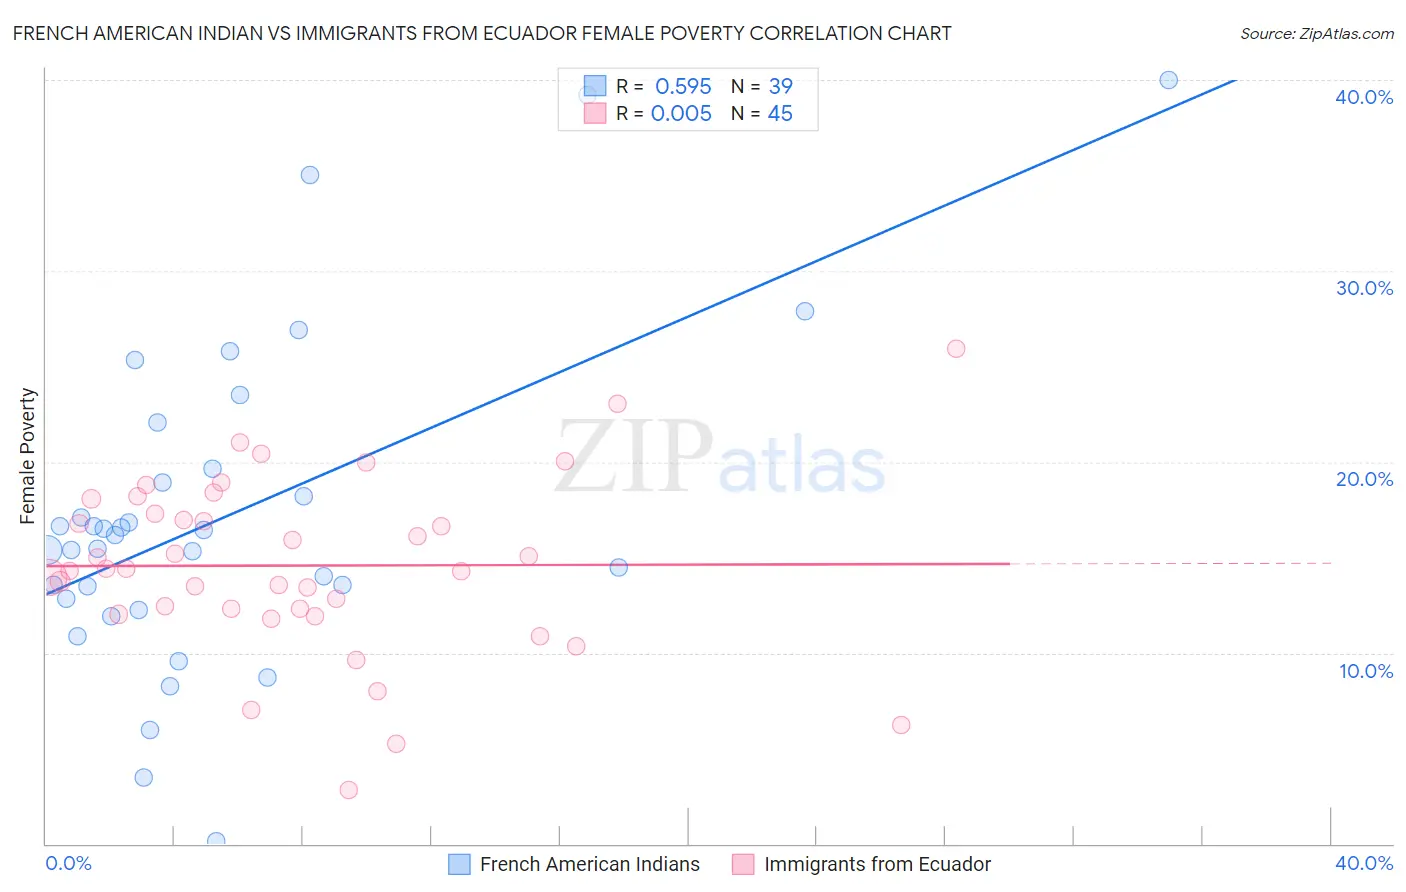 French American Indian vs Immigrants from Ecuador Female Poverty